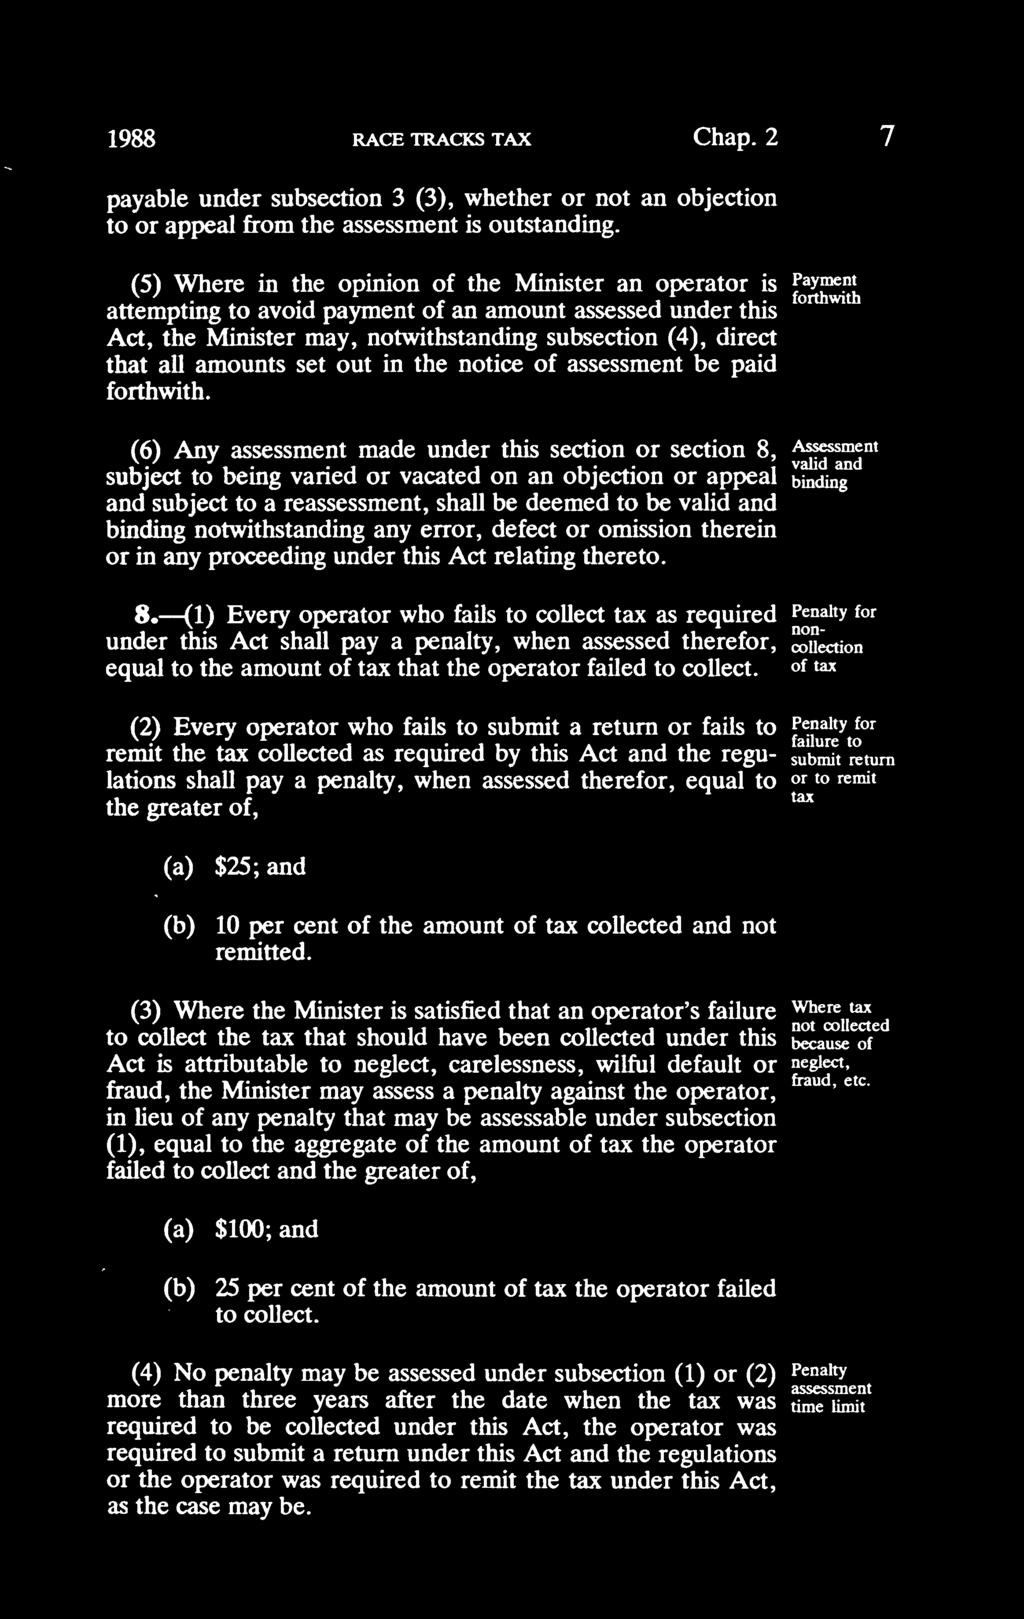 1988 RACE TRACKS TAX Chap. 2 payable under subsection 3 (3), whether or not an objection to or appeal from the assessment is outstanding.